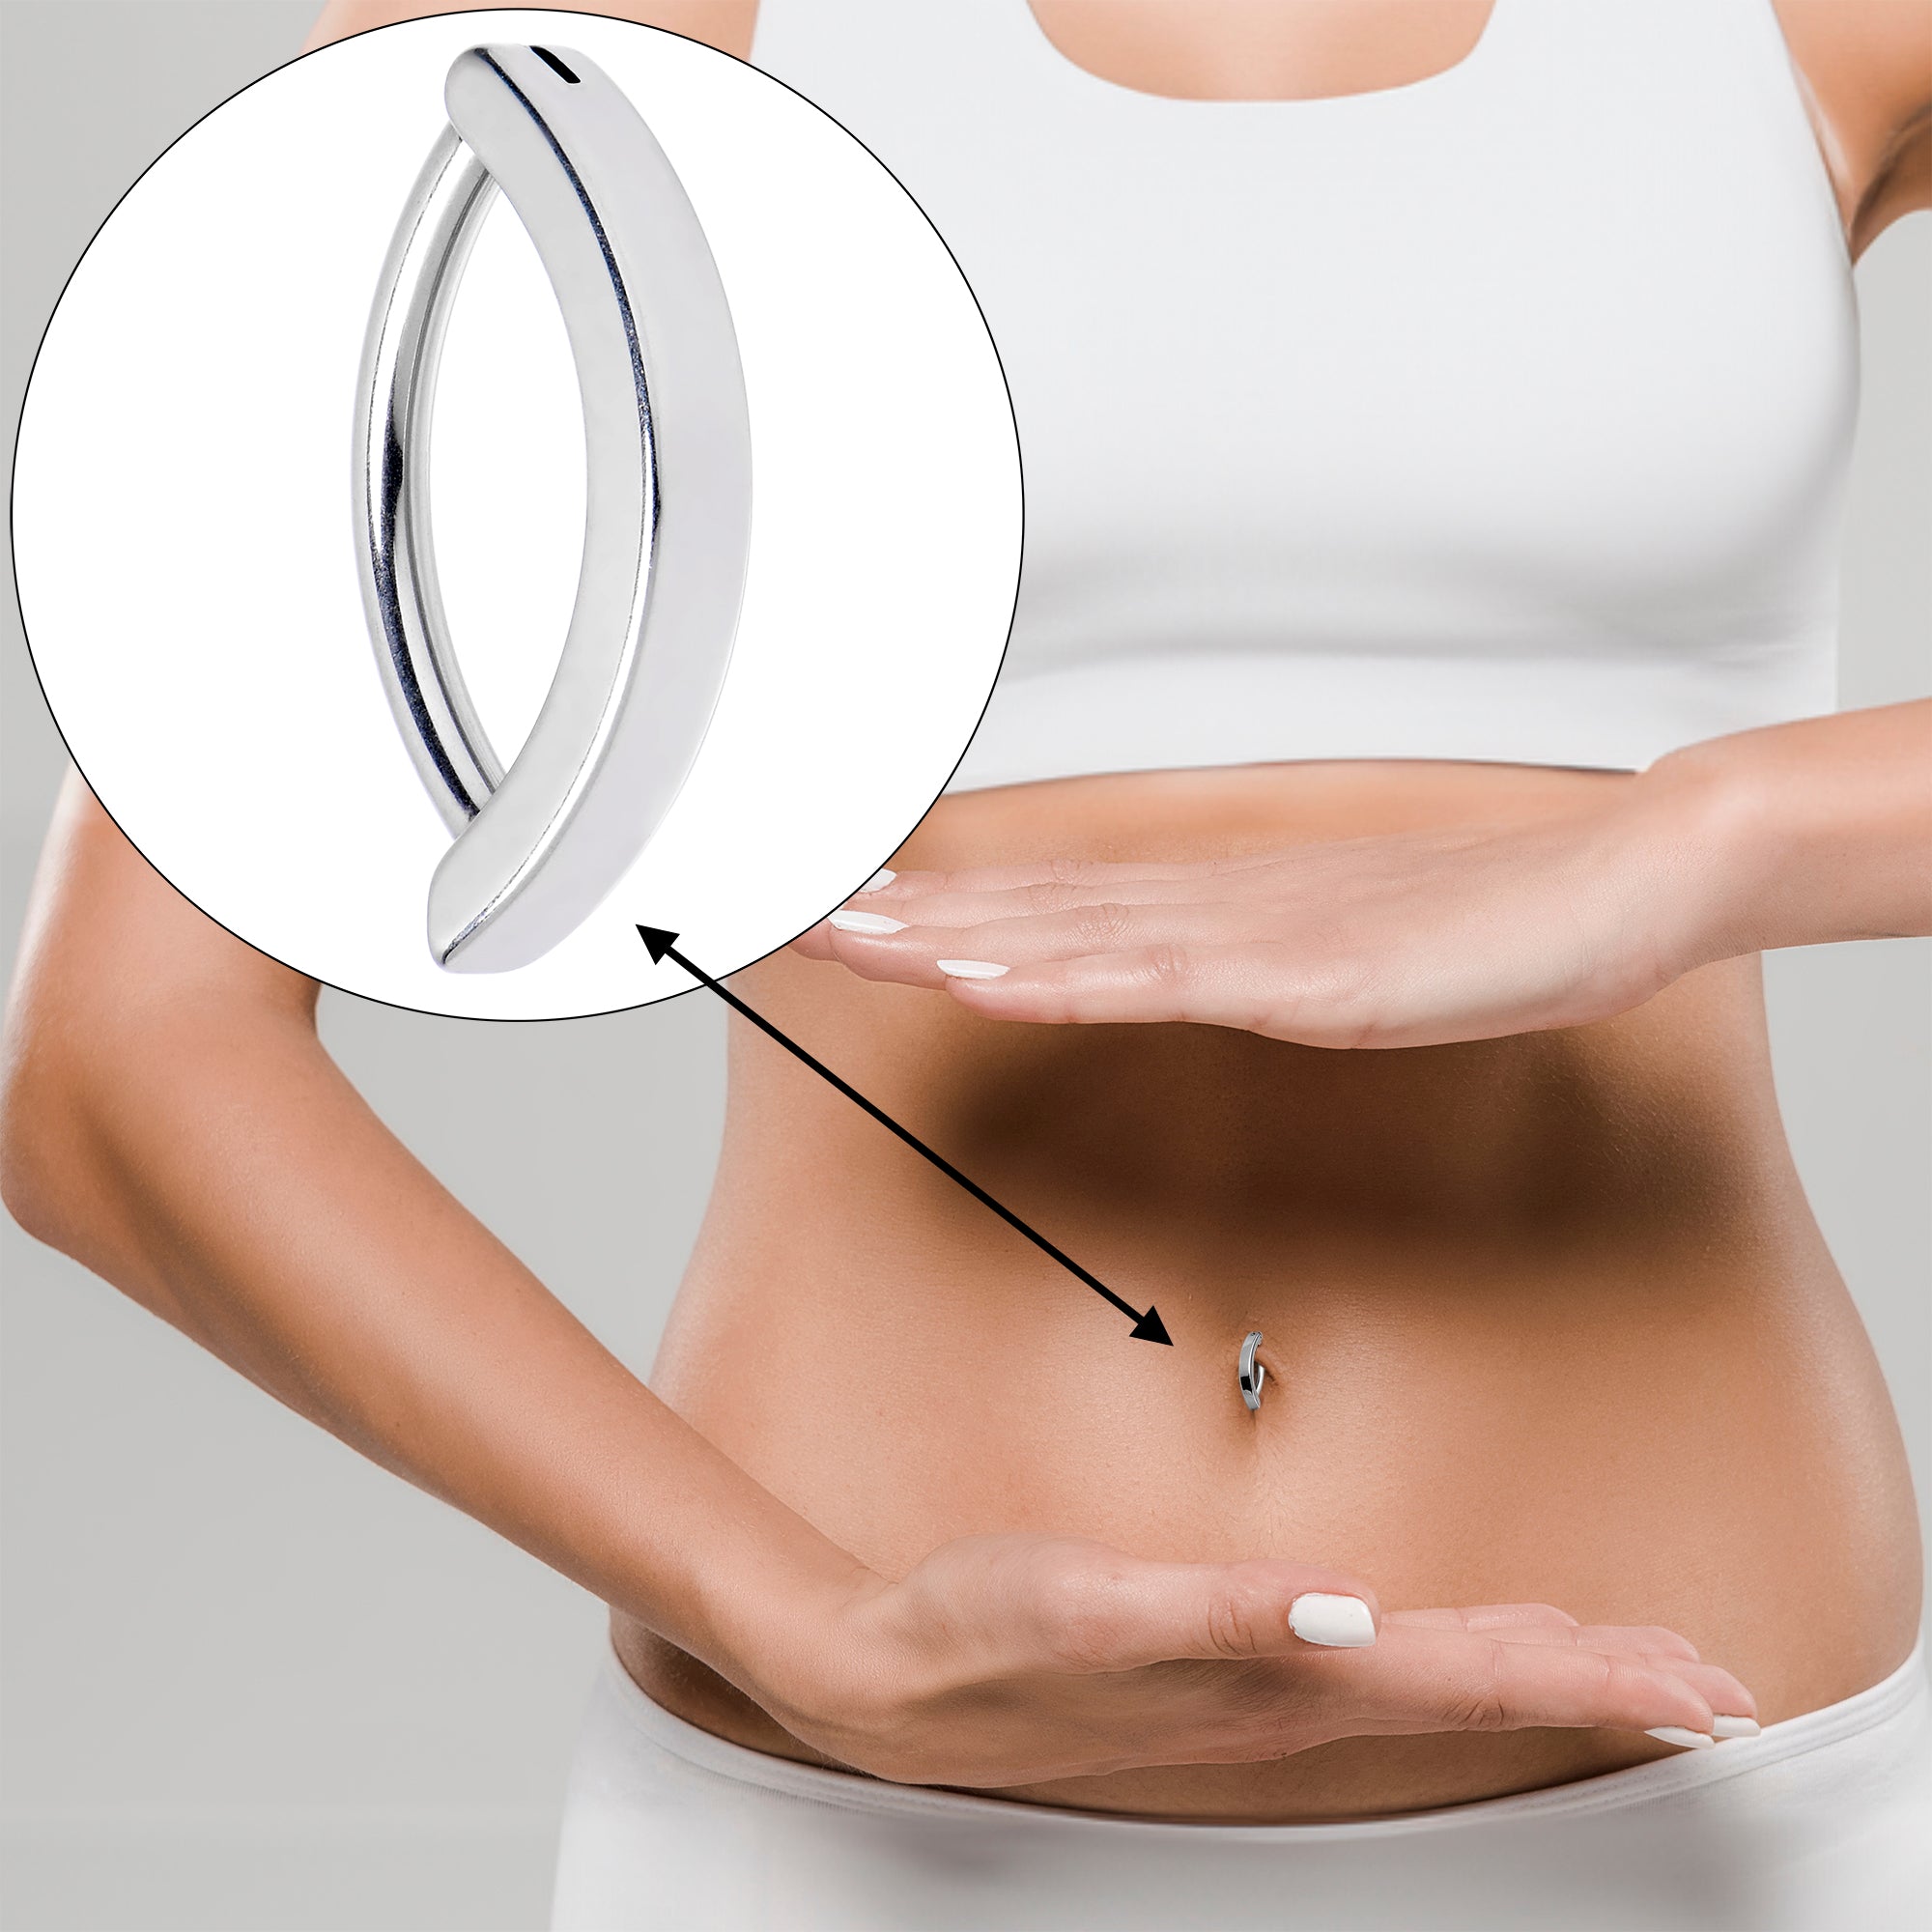 xray-of-ring-in-womans-stomach.png | Big 102.1 KYBG-FM